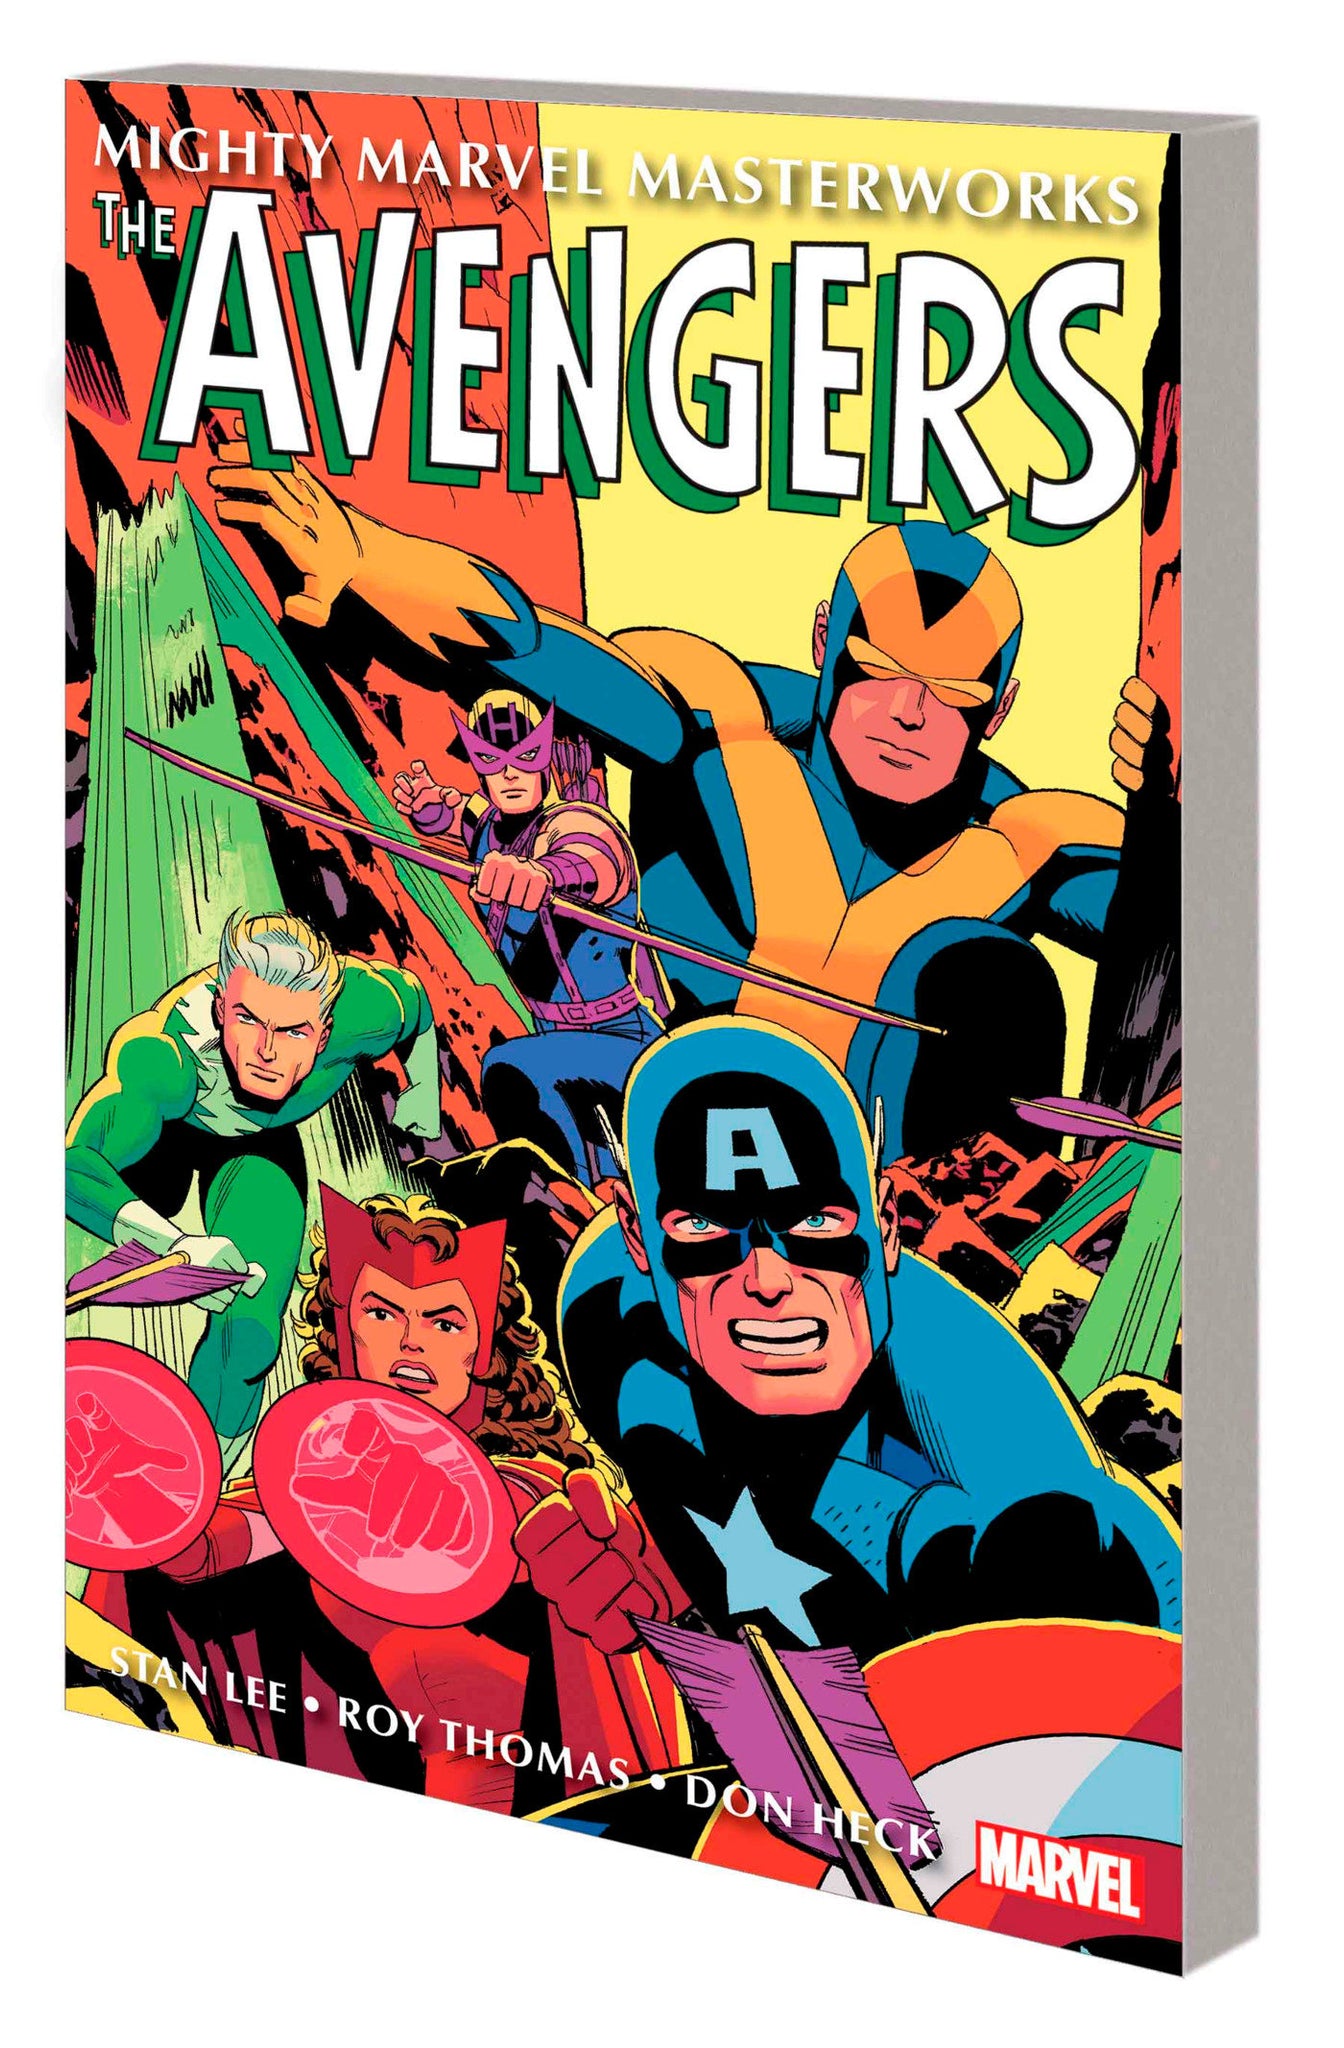 MIGHTY MARVEL MASTERWORKS: THE AVENGERS VOL 4 - THE SIGN OF THE SERPENT (8/7/24) PRESALE